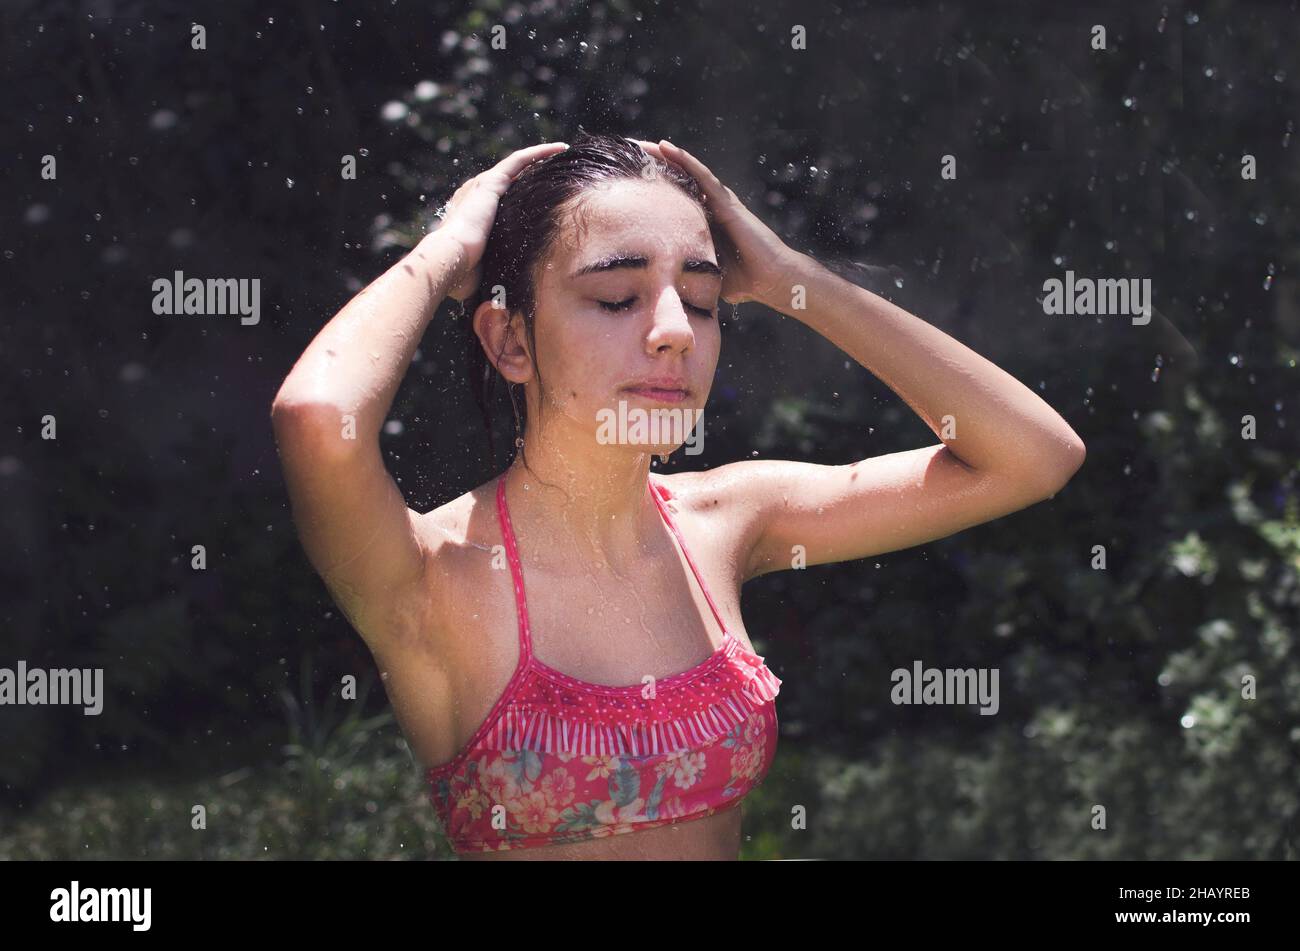 Teenage girl standing in a garden cooling off with a water hose, Argentina Stock Photo